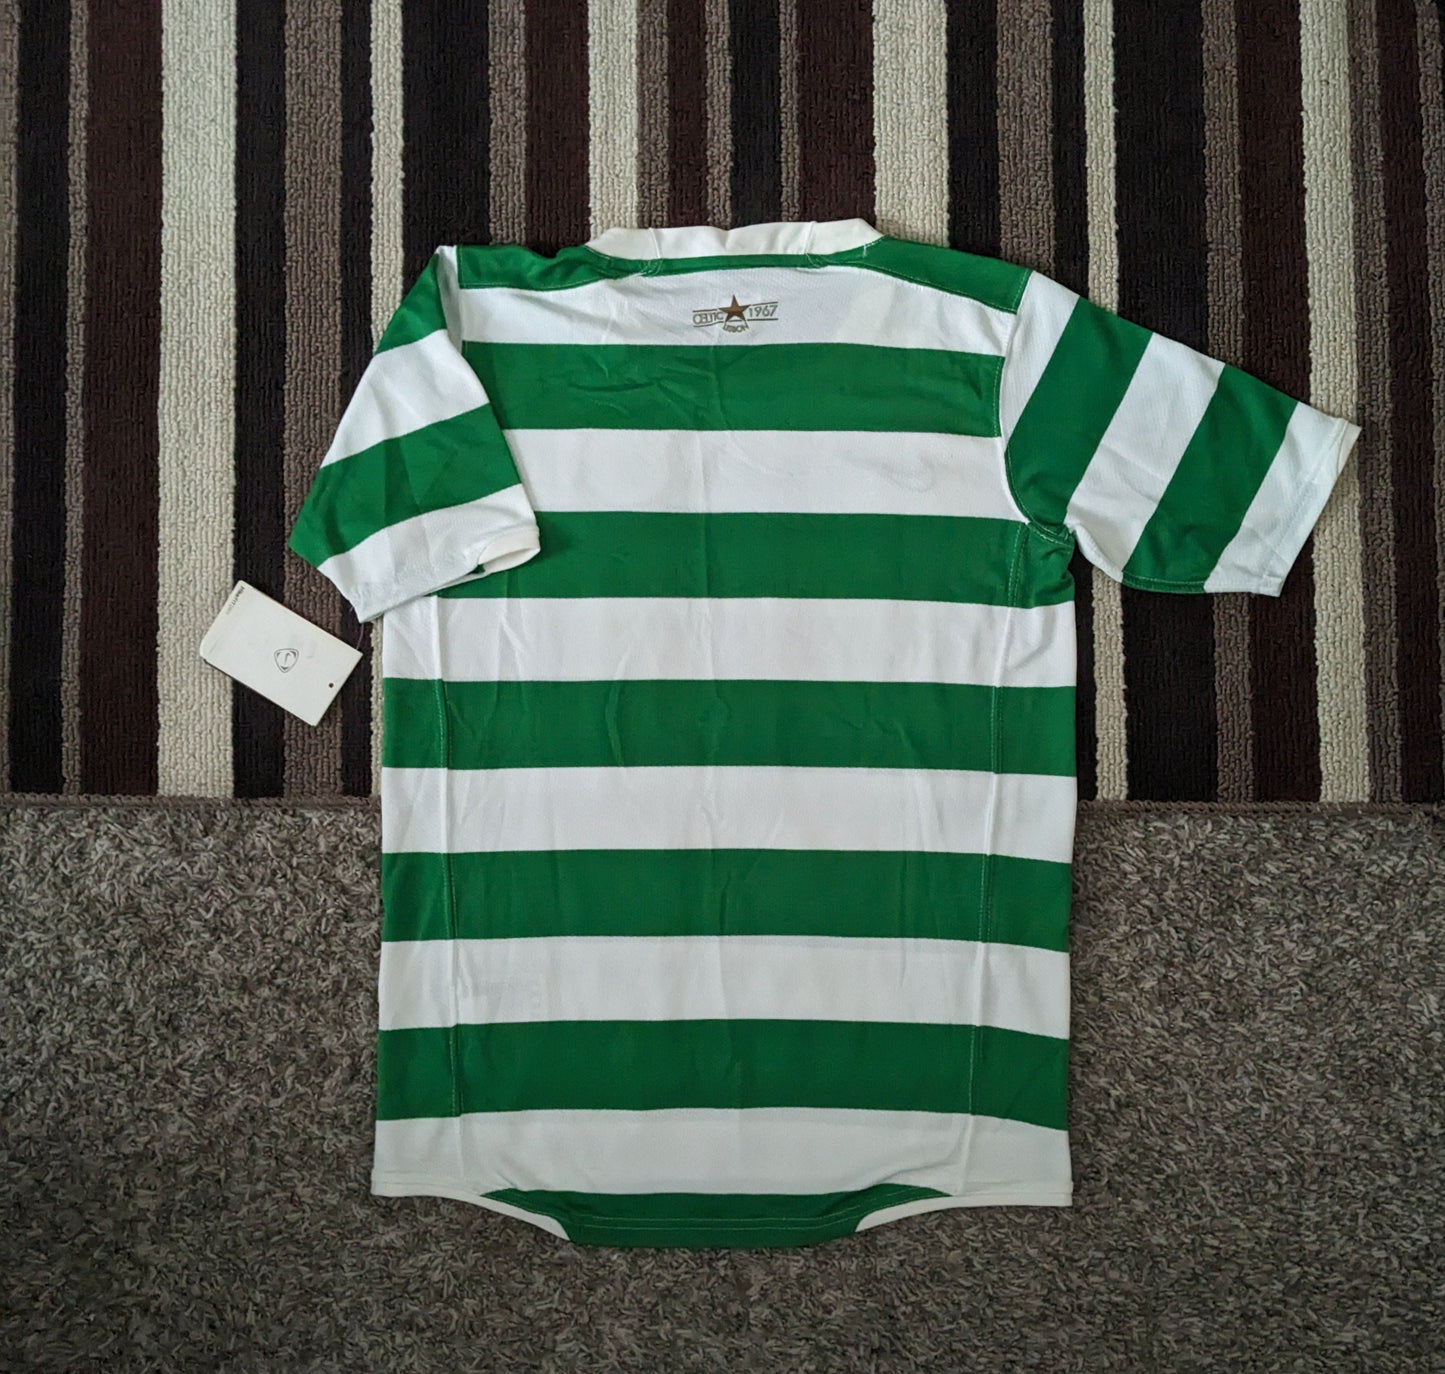 Celtic Scotland home (YOUTH L) *BRAND NEW WITH TAGS